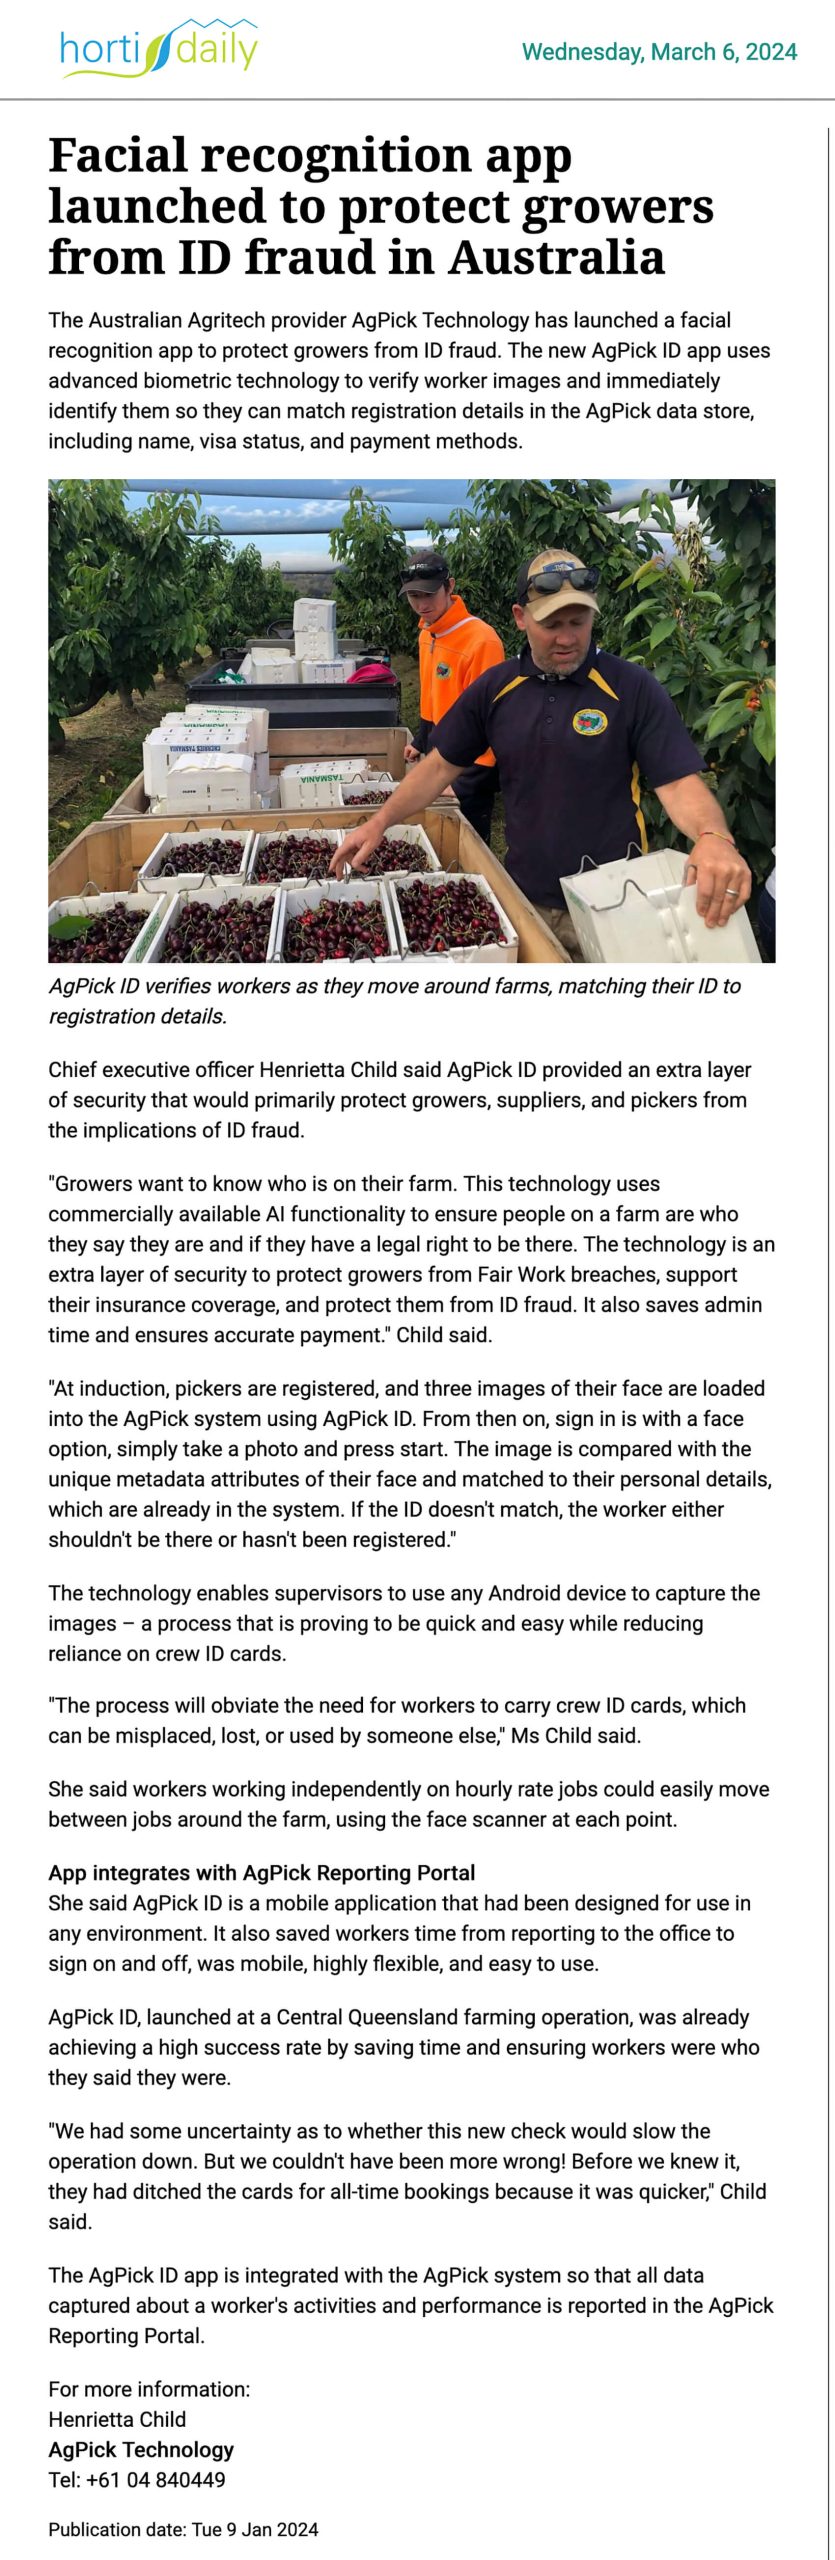 facial-recognition-app-protects-farmers-from-id-fraud